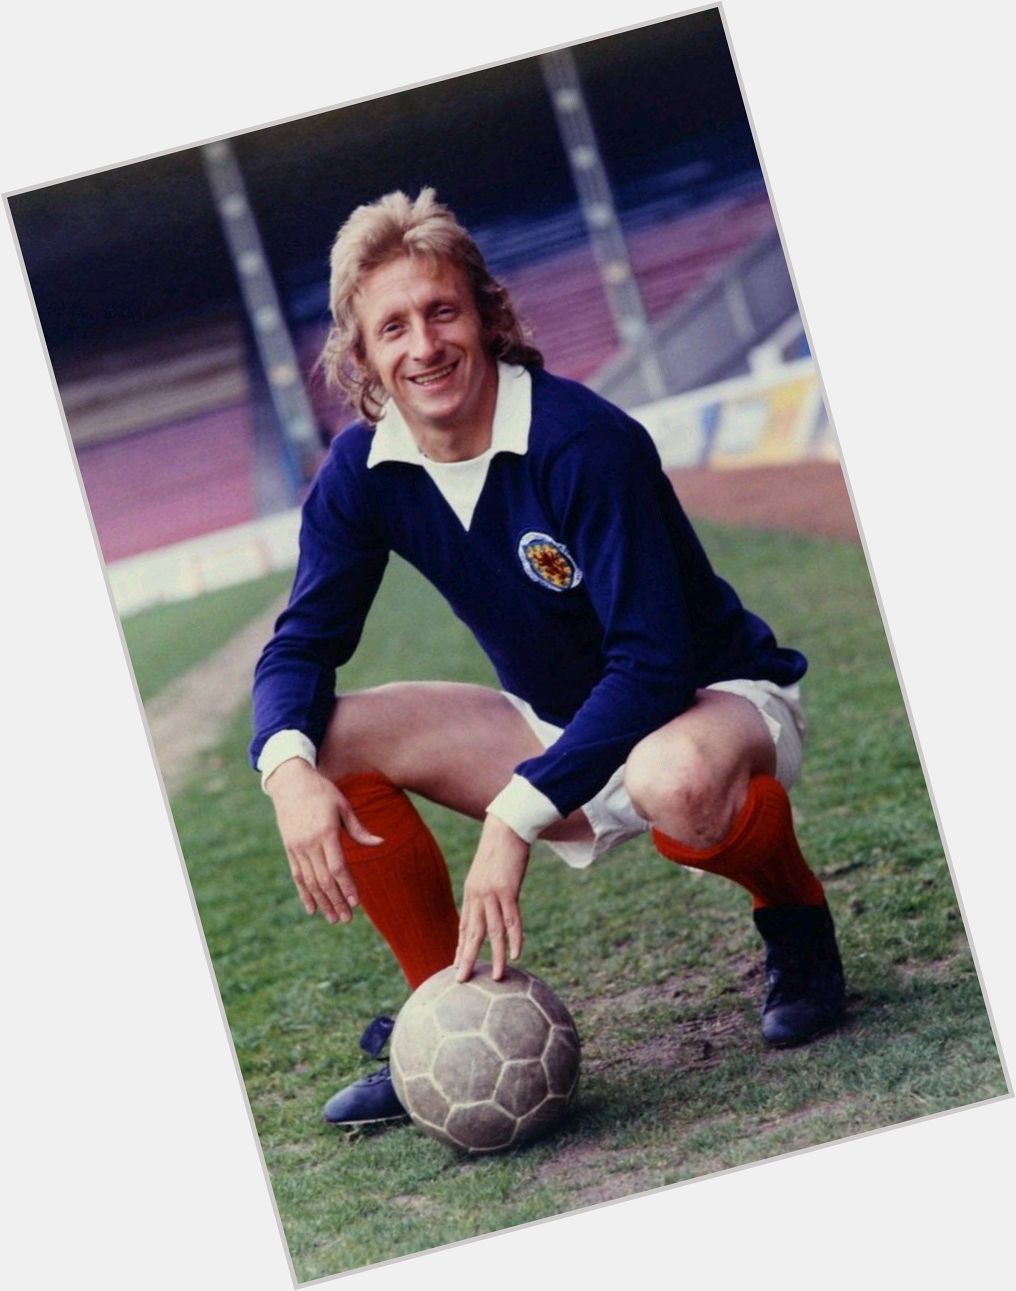 Happy 80th Birthday to Scotland football legend Denis Law who scored 30 times for his country! 